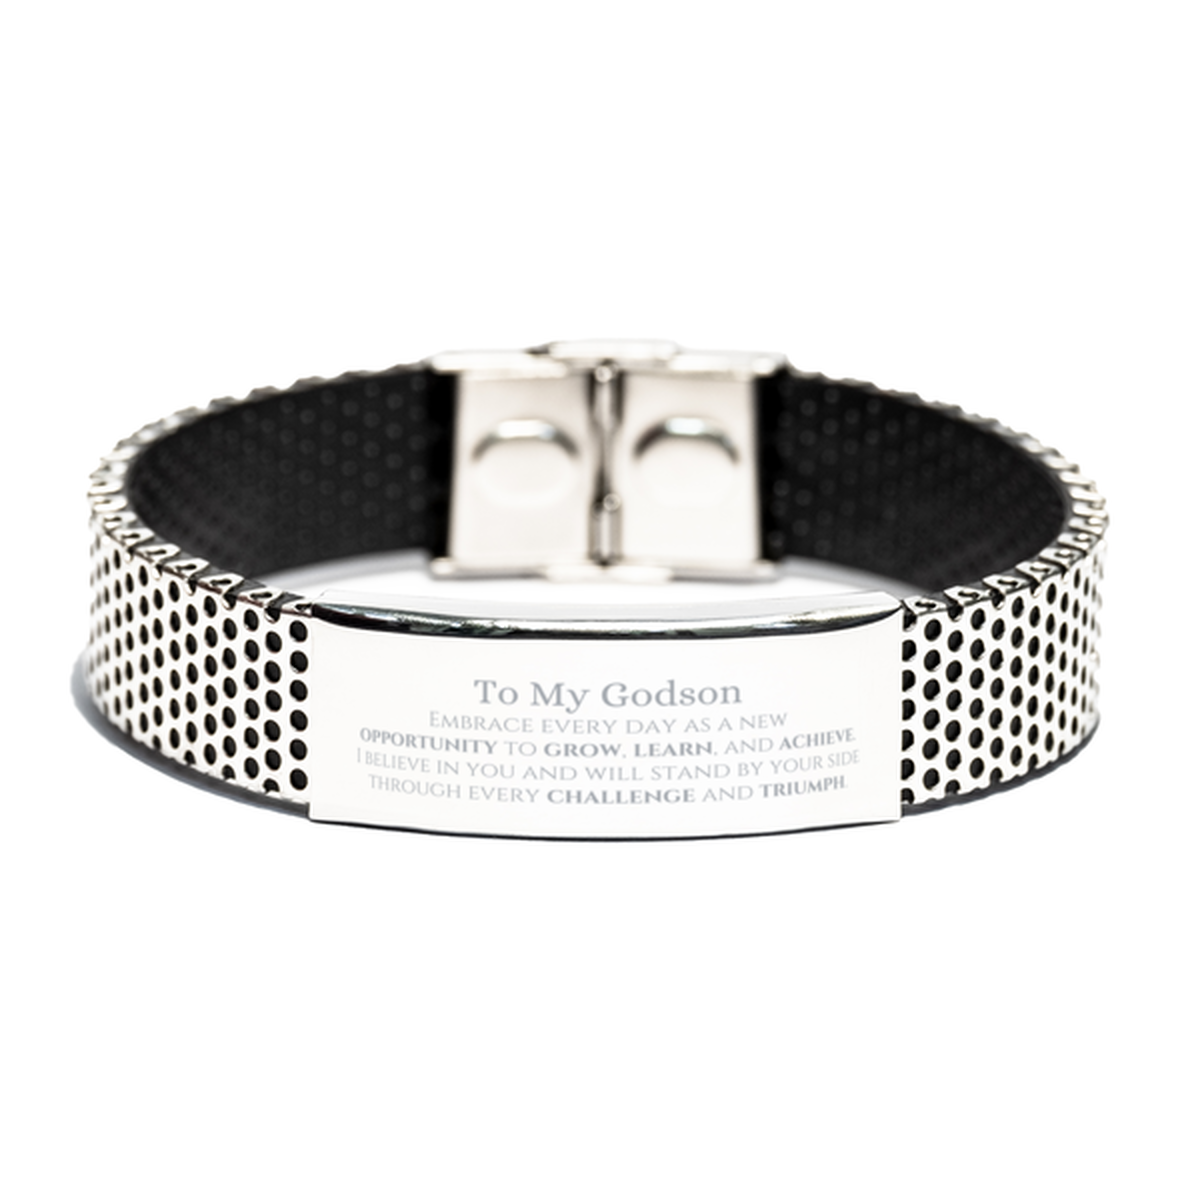 To My Godson Gifts, I believe in you and will stand by your side, Inspirational Stainless Steel Bracelet For Godson, Birthday Christmas Motivational Godson Gifts